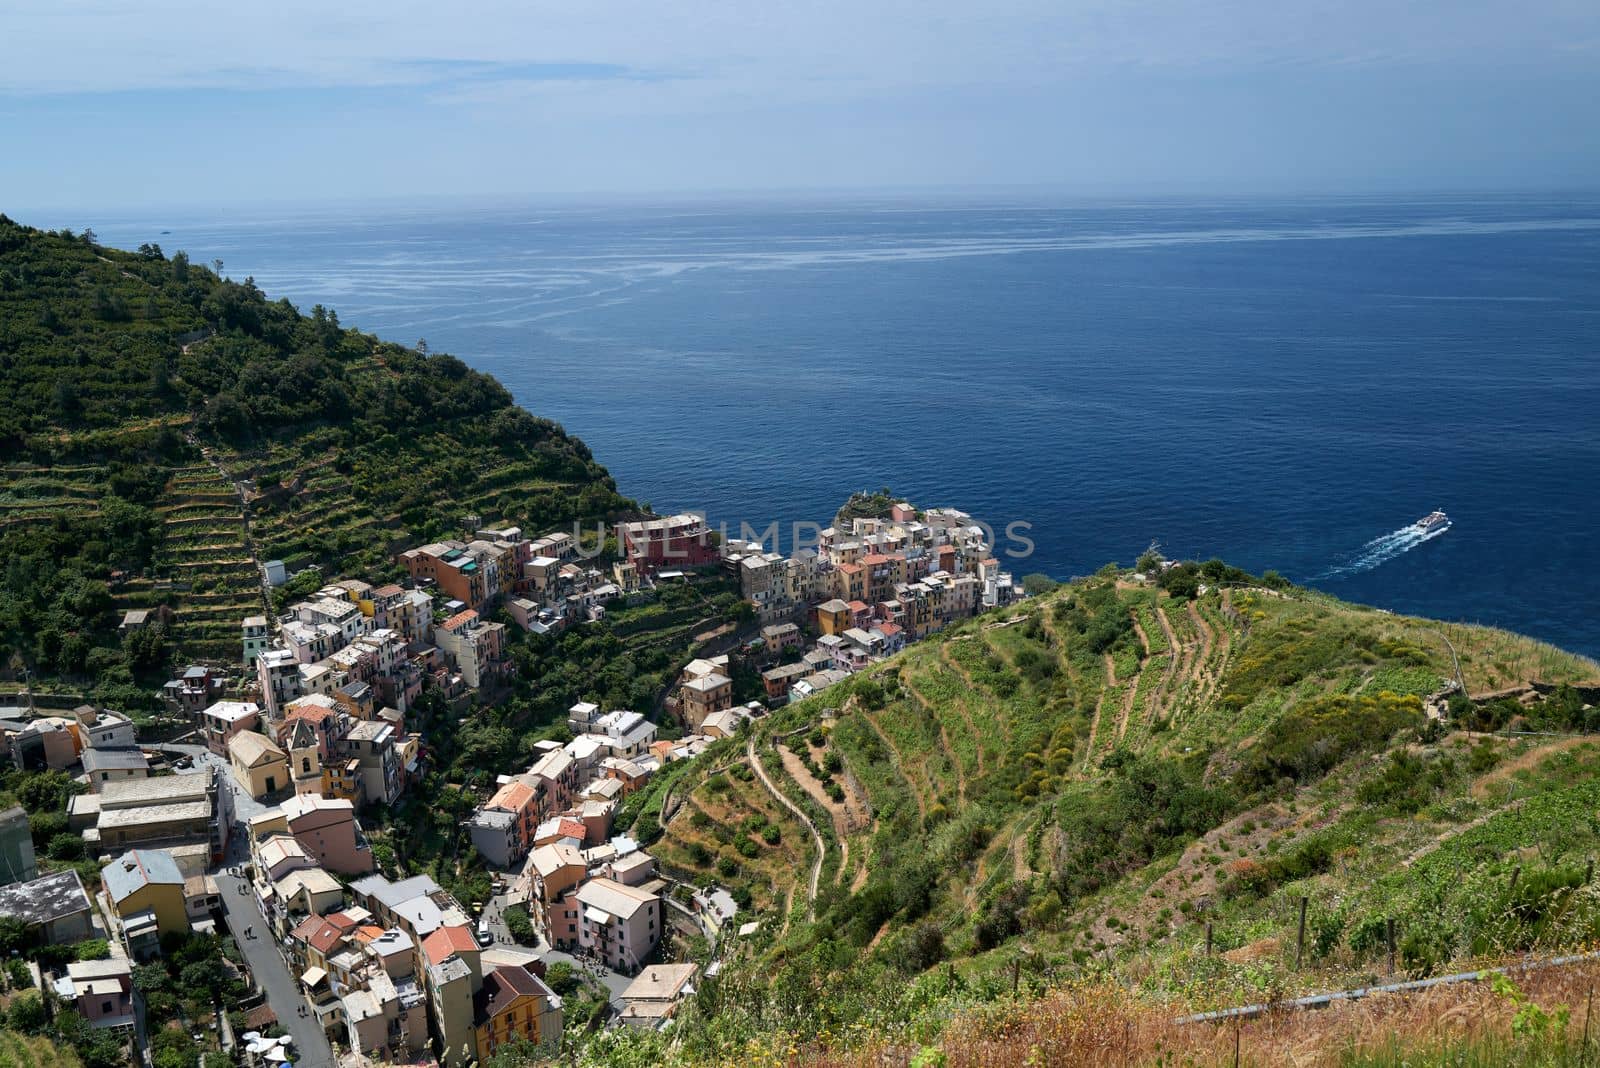 View over one of the famous villages on the picturesque coast of the Cinque Terre region with the blue sea in the background.